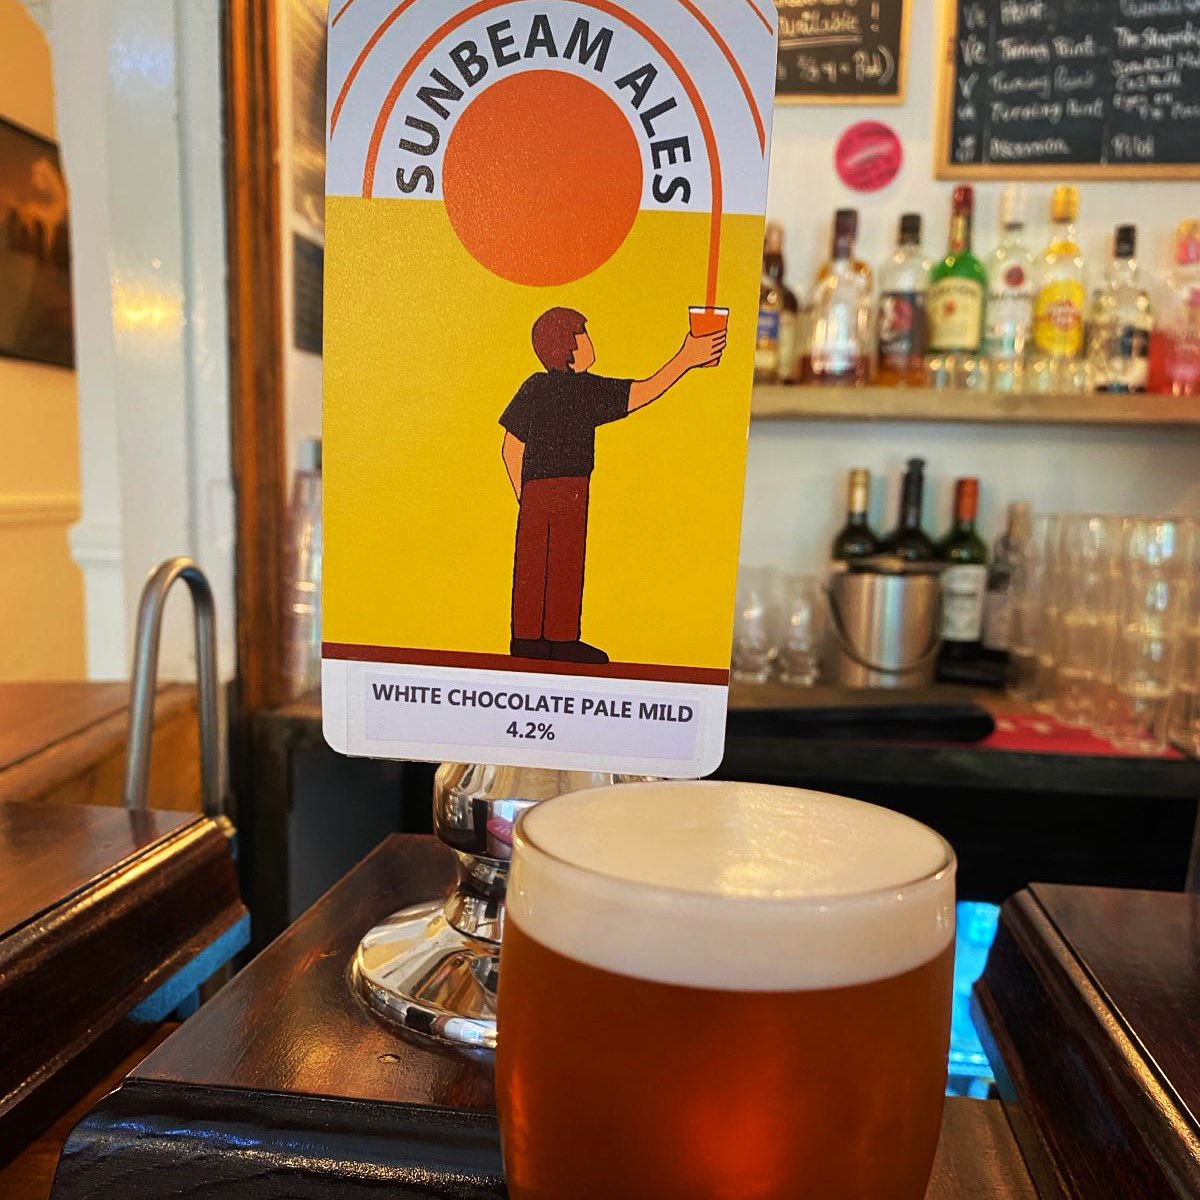 New beer gracing our cask lines.
From @SunbeamAles we have the wonderful creamy White Chocolate Mild

Pours a clear golden body with near perfect tight white head and aromas of sweet white chocolate. Deliciously creamy with a full body! 

Not one to miss!